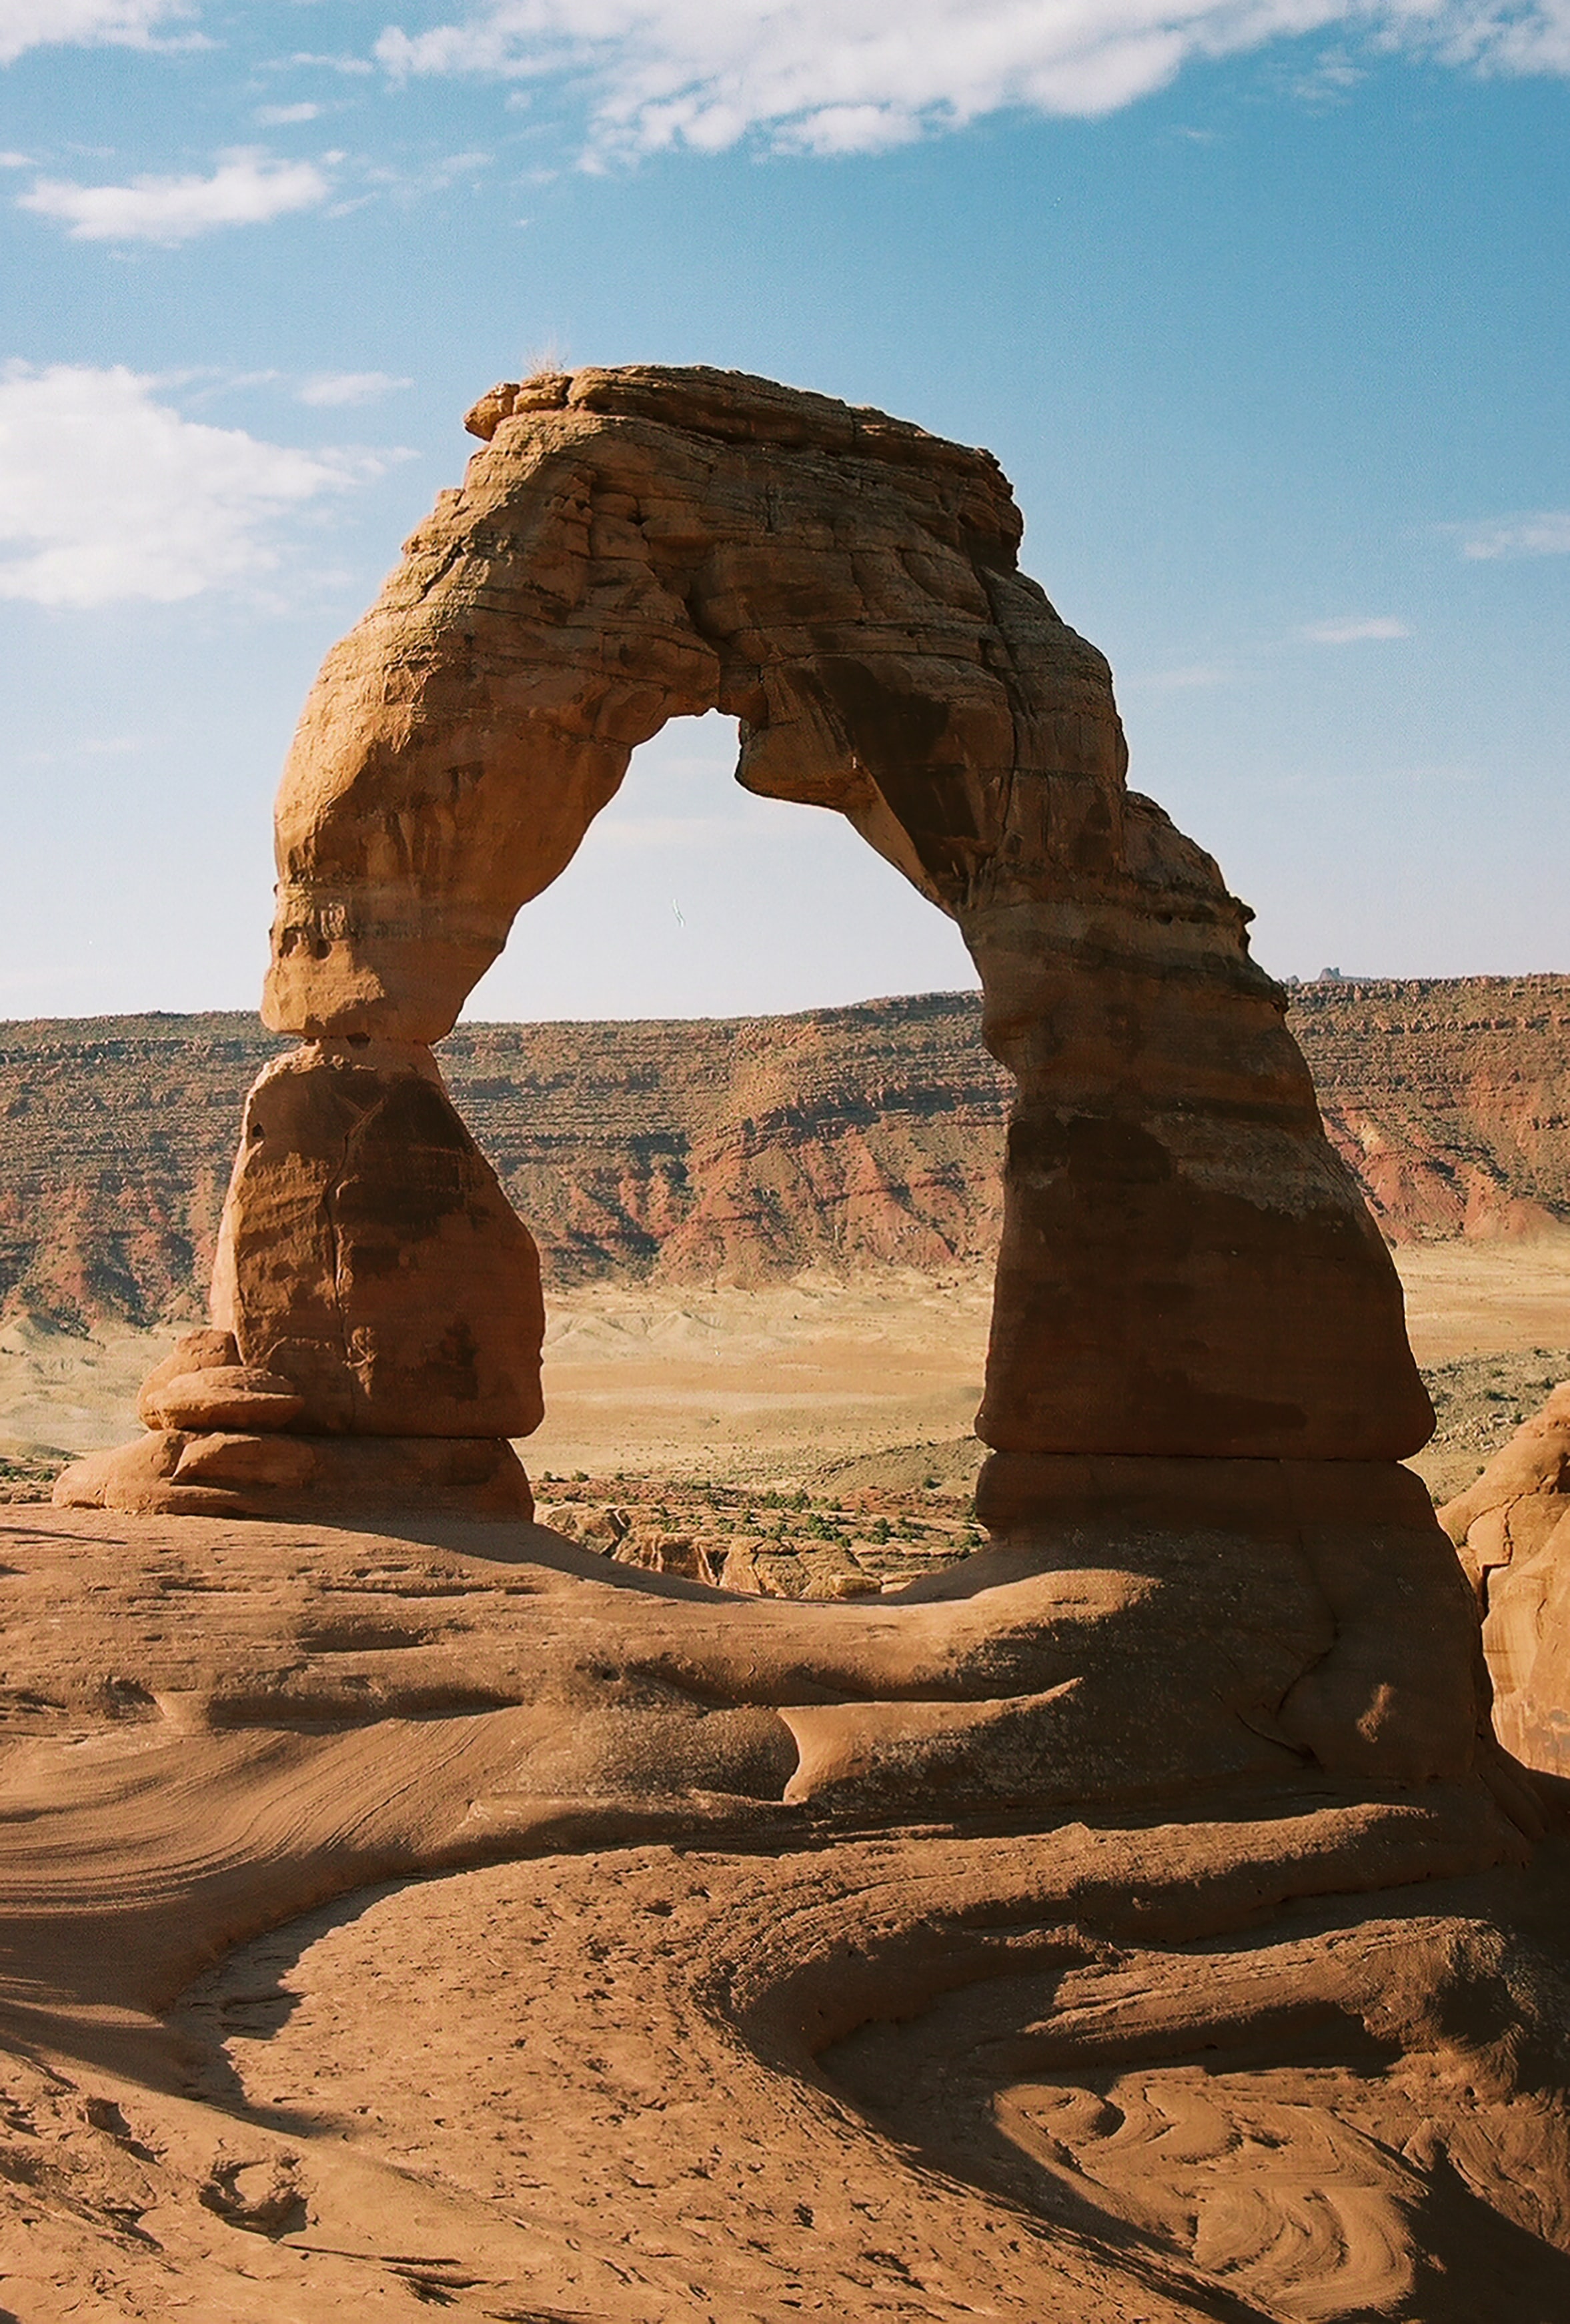 nature, canyon, sand, rocks, arch, sandy High Definition image